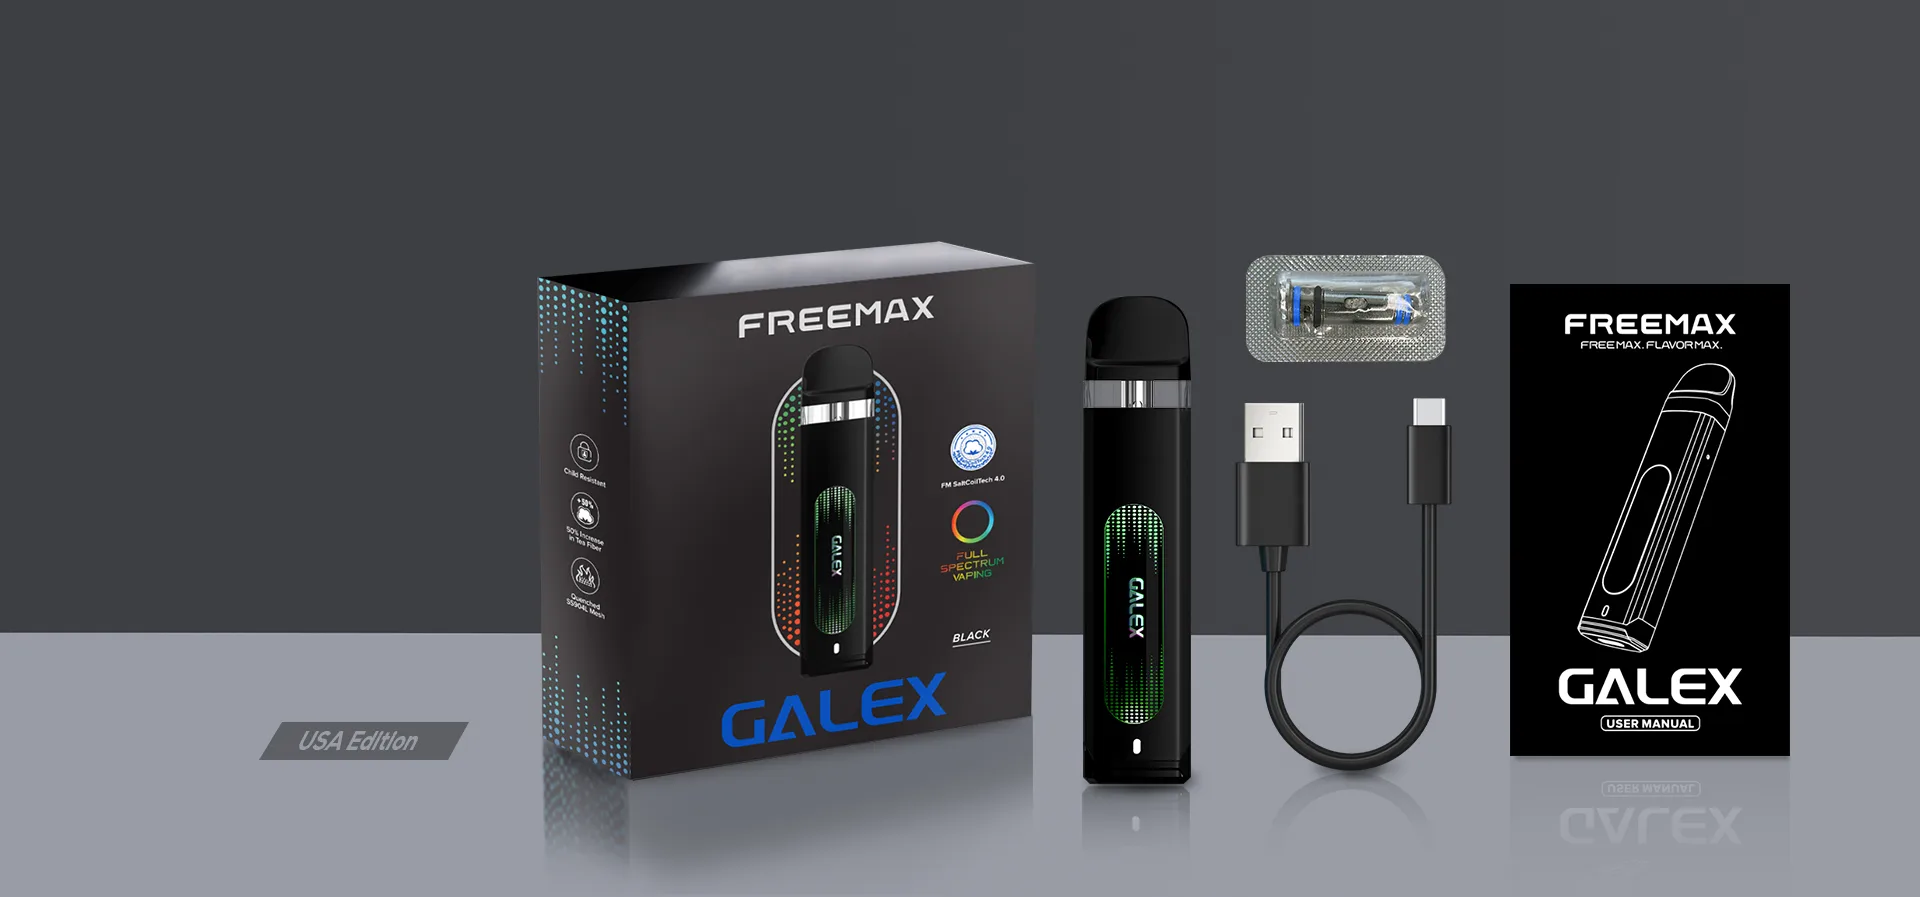 Freemax Galex Package Content